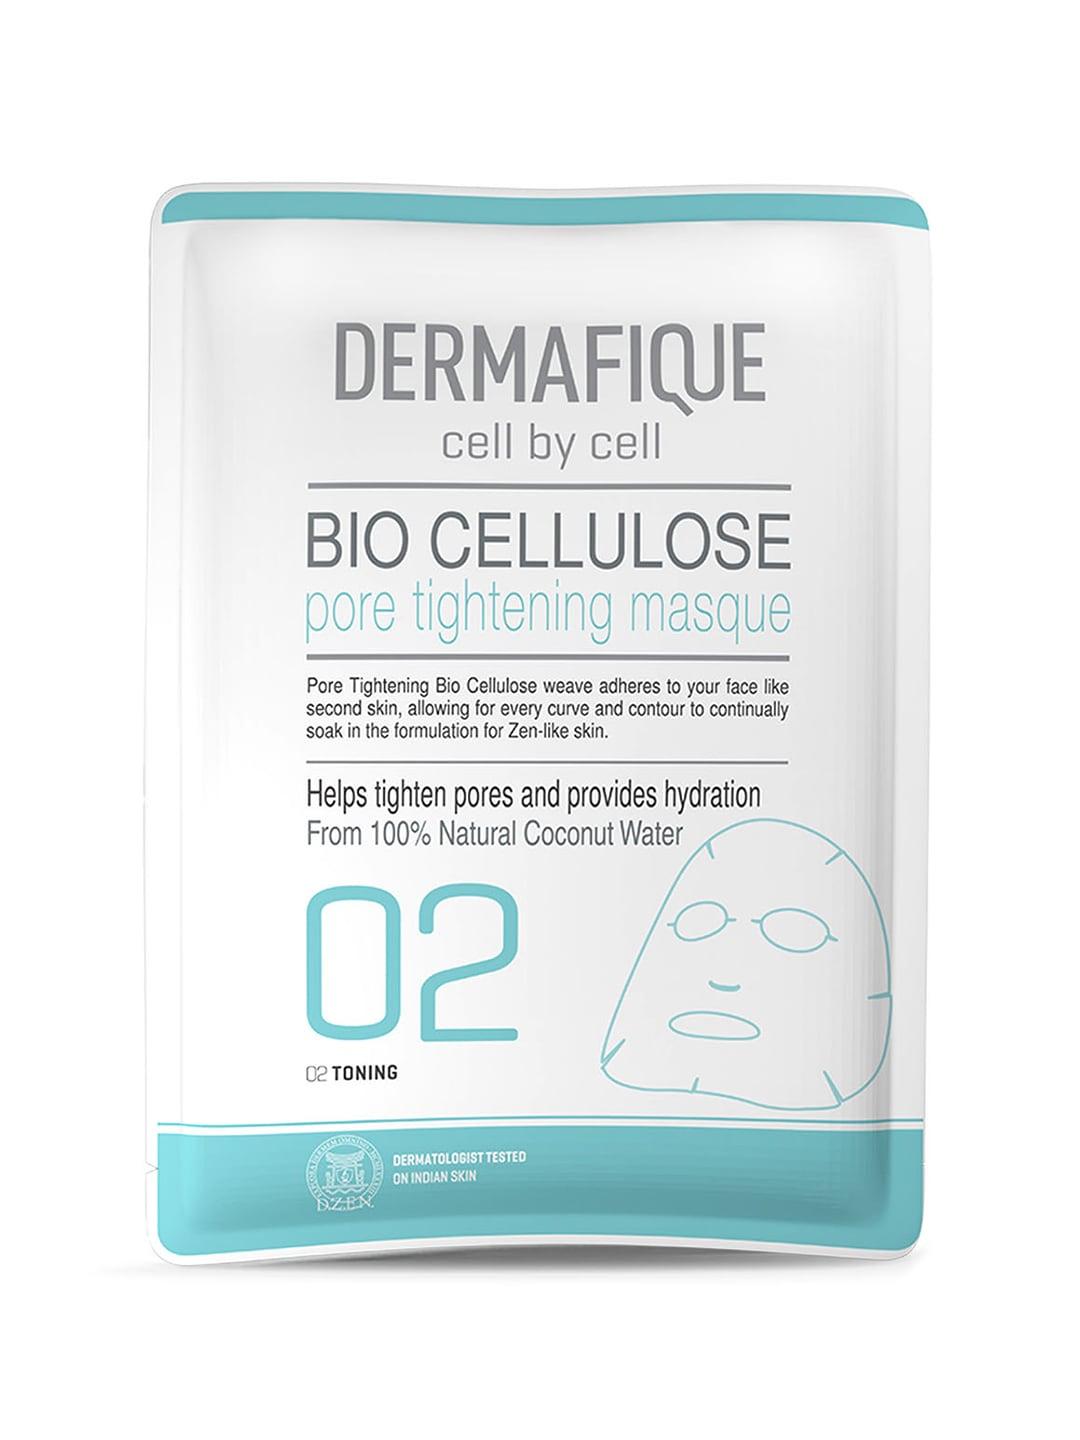 Dermafique Cell by Cell Bio Cellulose Pore Tightening Face Serum Sheet Mask